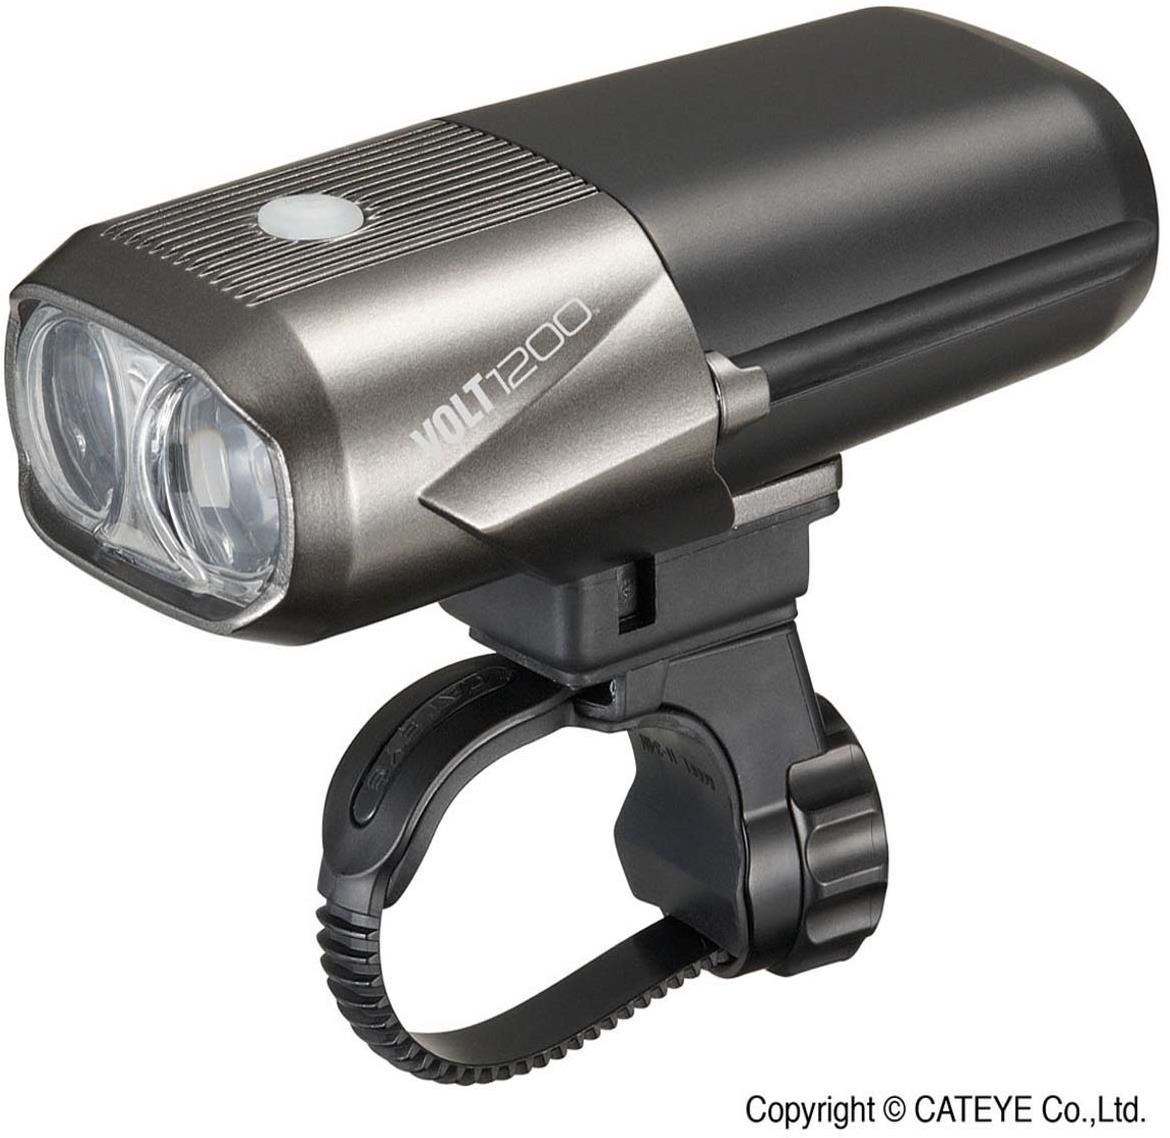 Cateye Volt 1200 Rechargeable USB Front Light product image